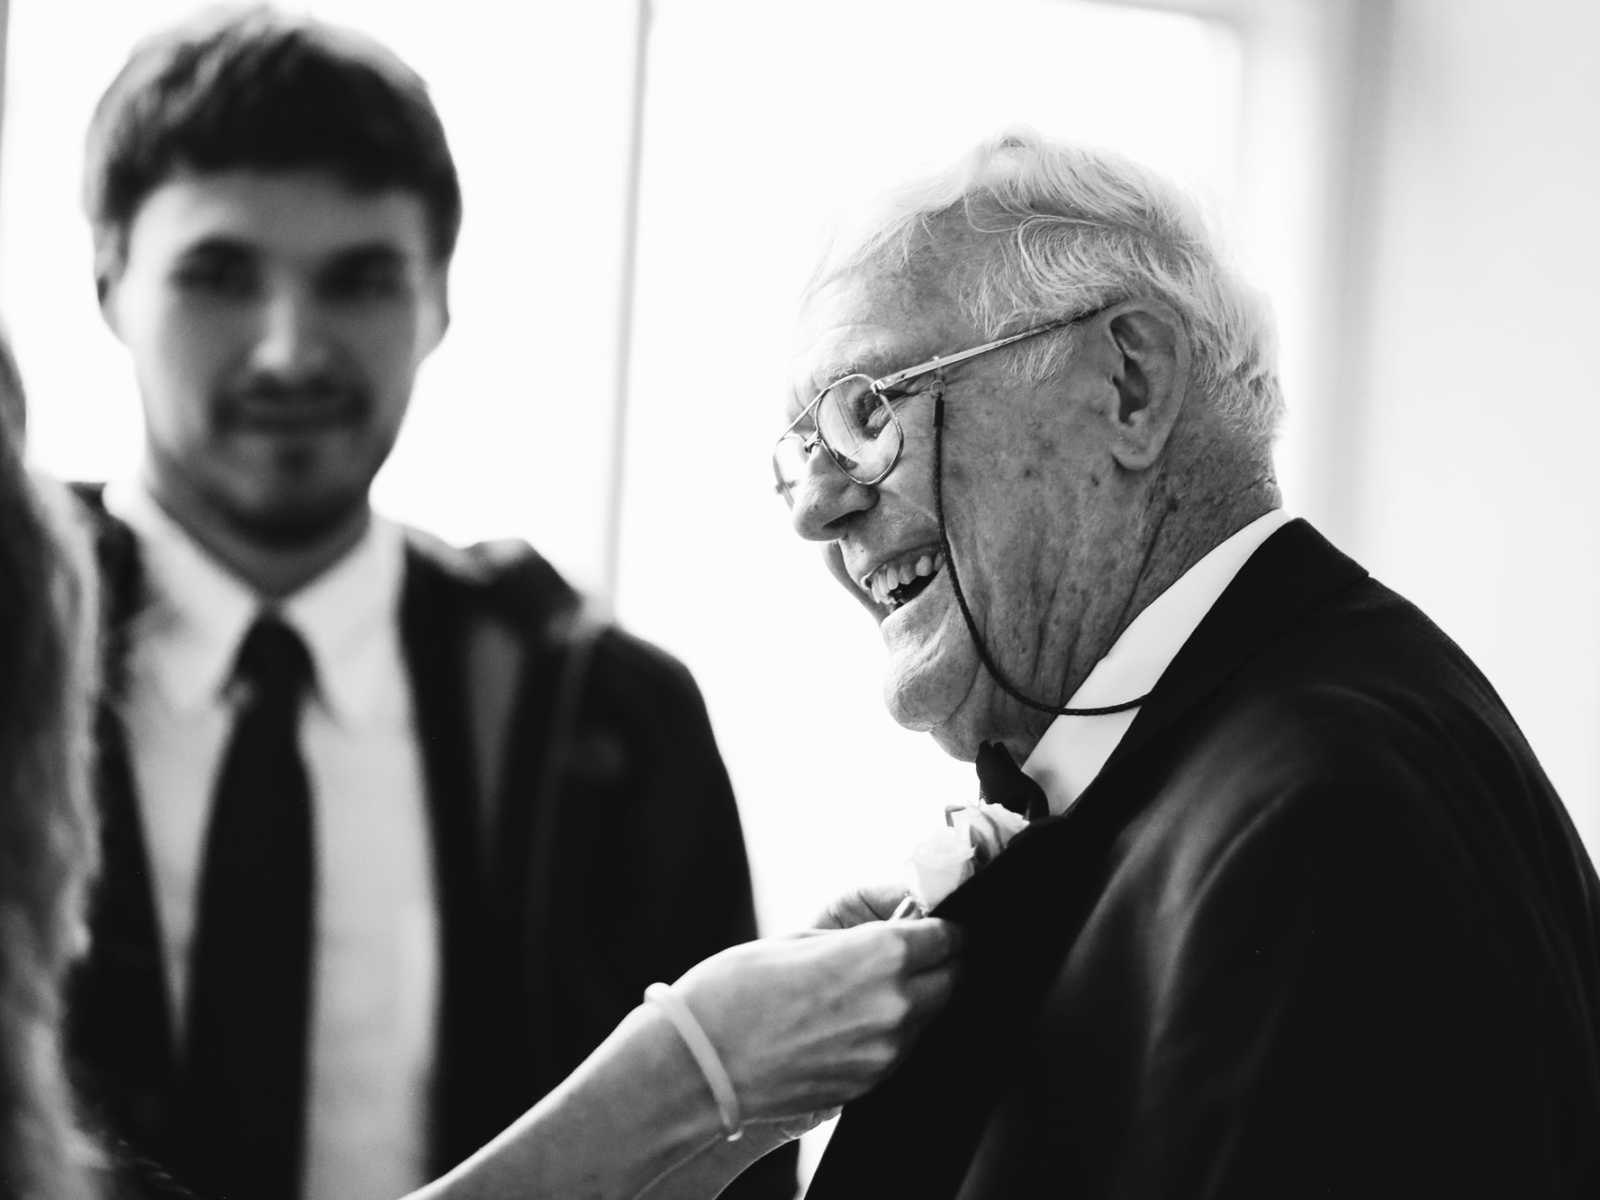 Elderly groom smiles as woman places boutonniere on him